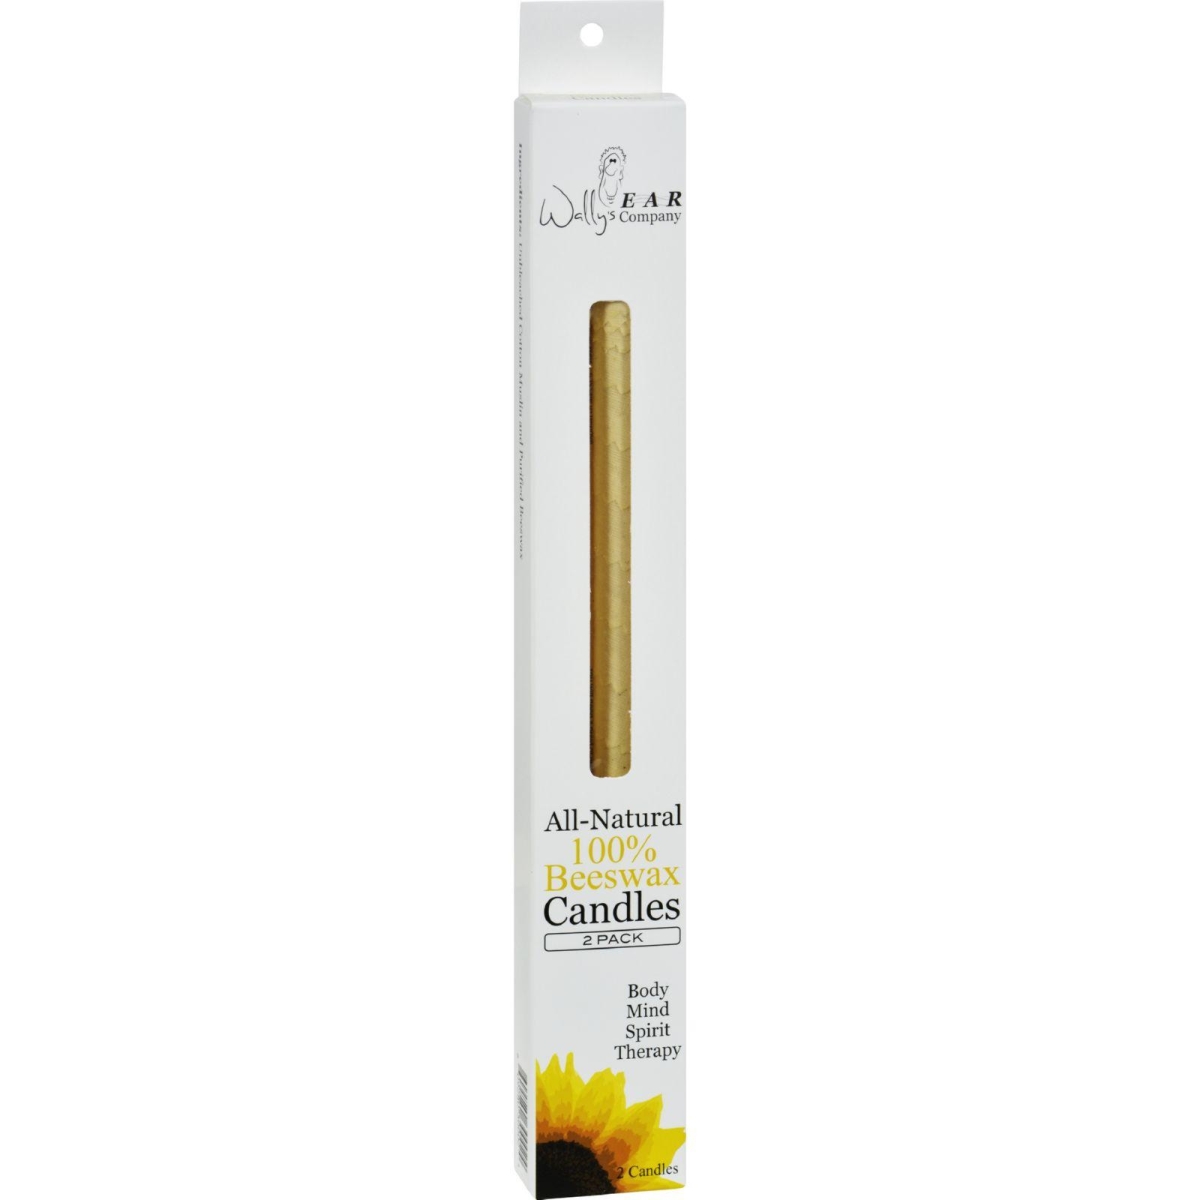 Hg0115931 Beeswax Ear Candle - 2 Candles